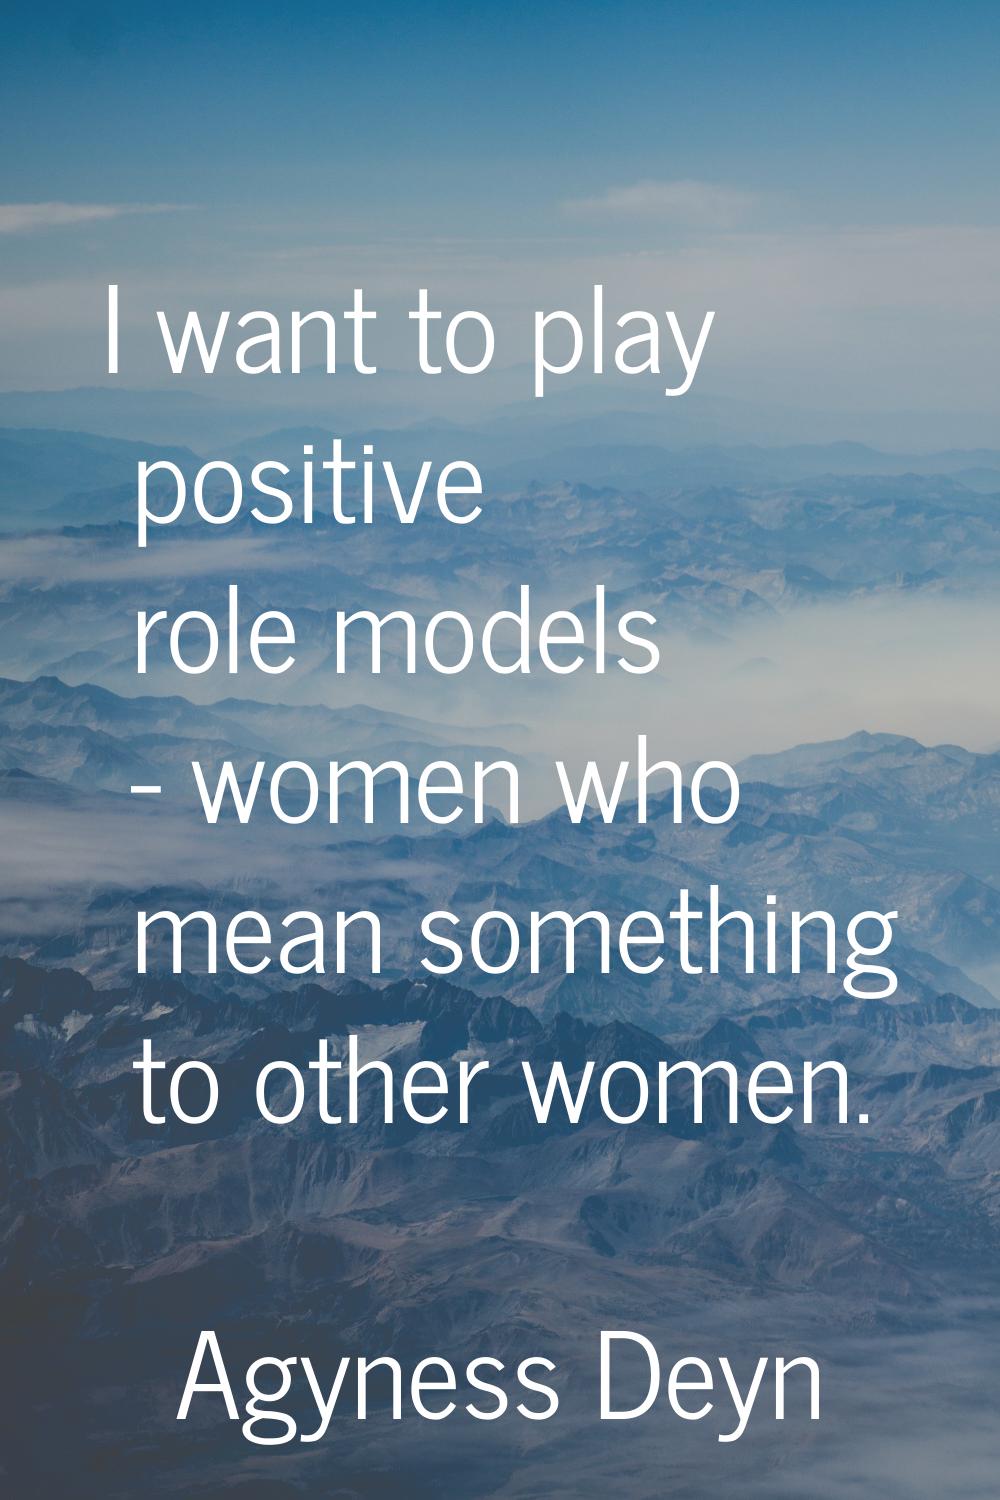 I want to play positive role models - women who mean something to other women.